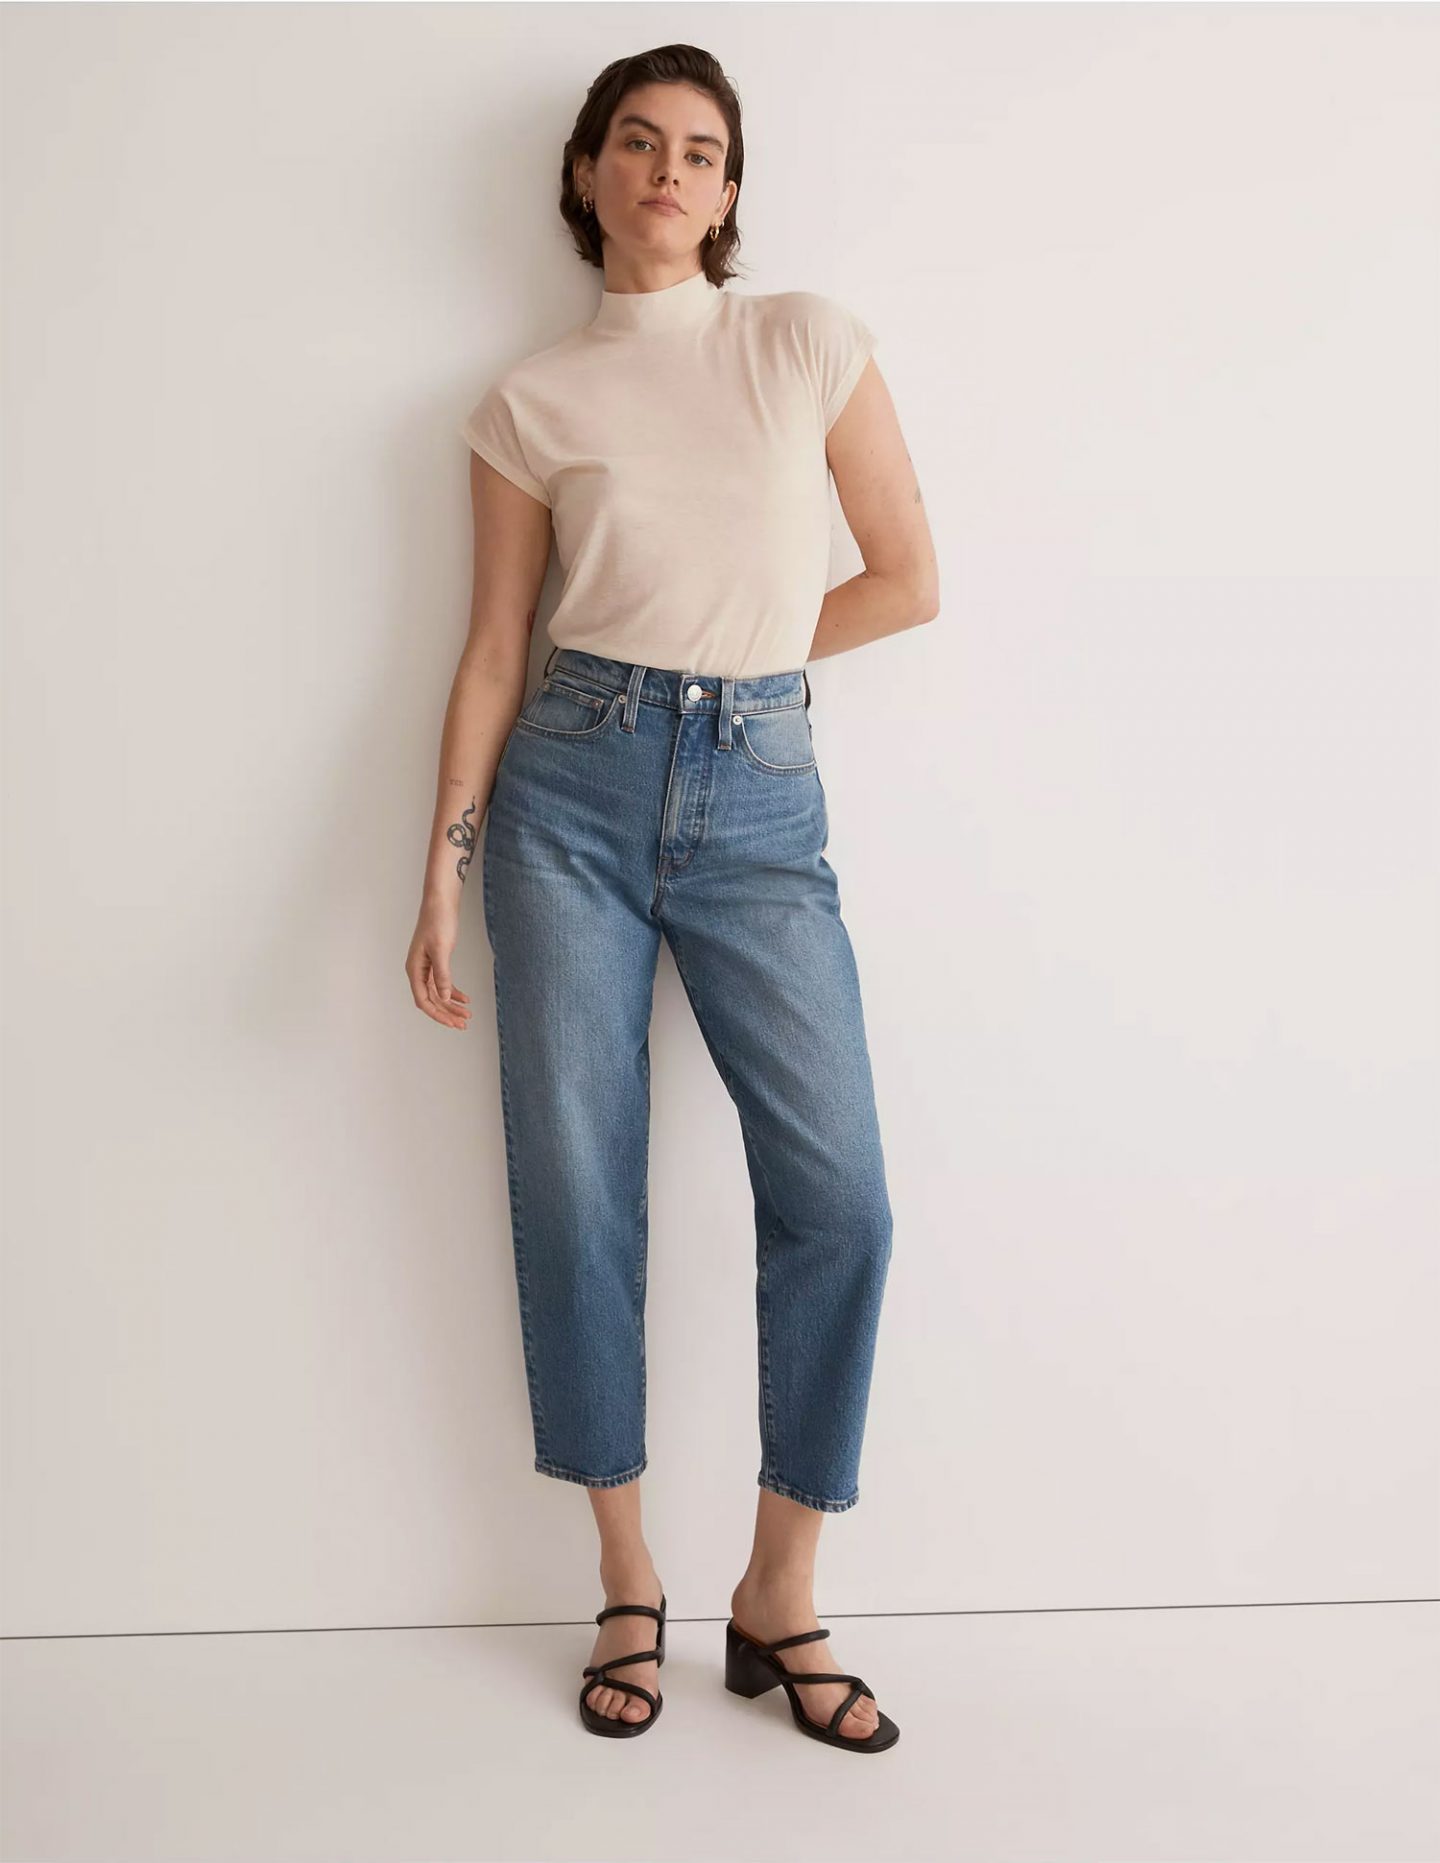 Horseshoe, Gaucho & Balloon Jeans Trend - THE JEANS BLOG